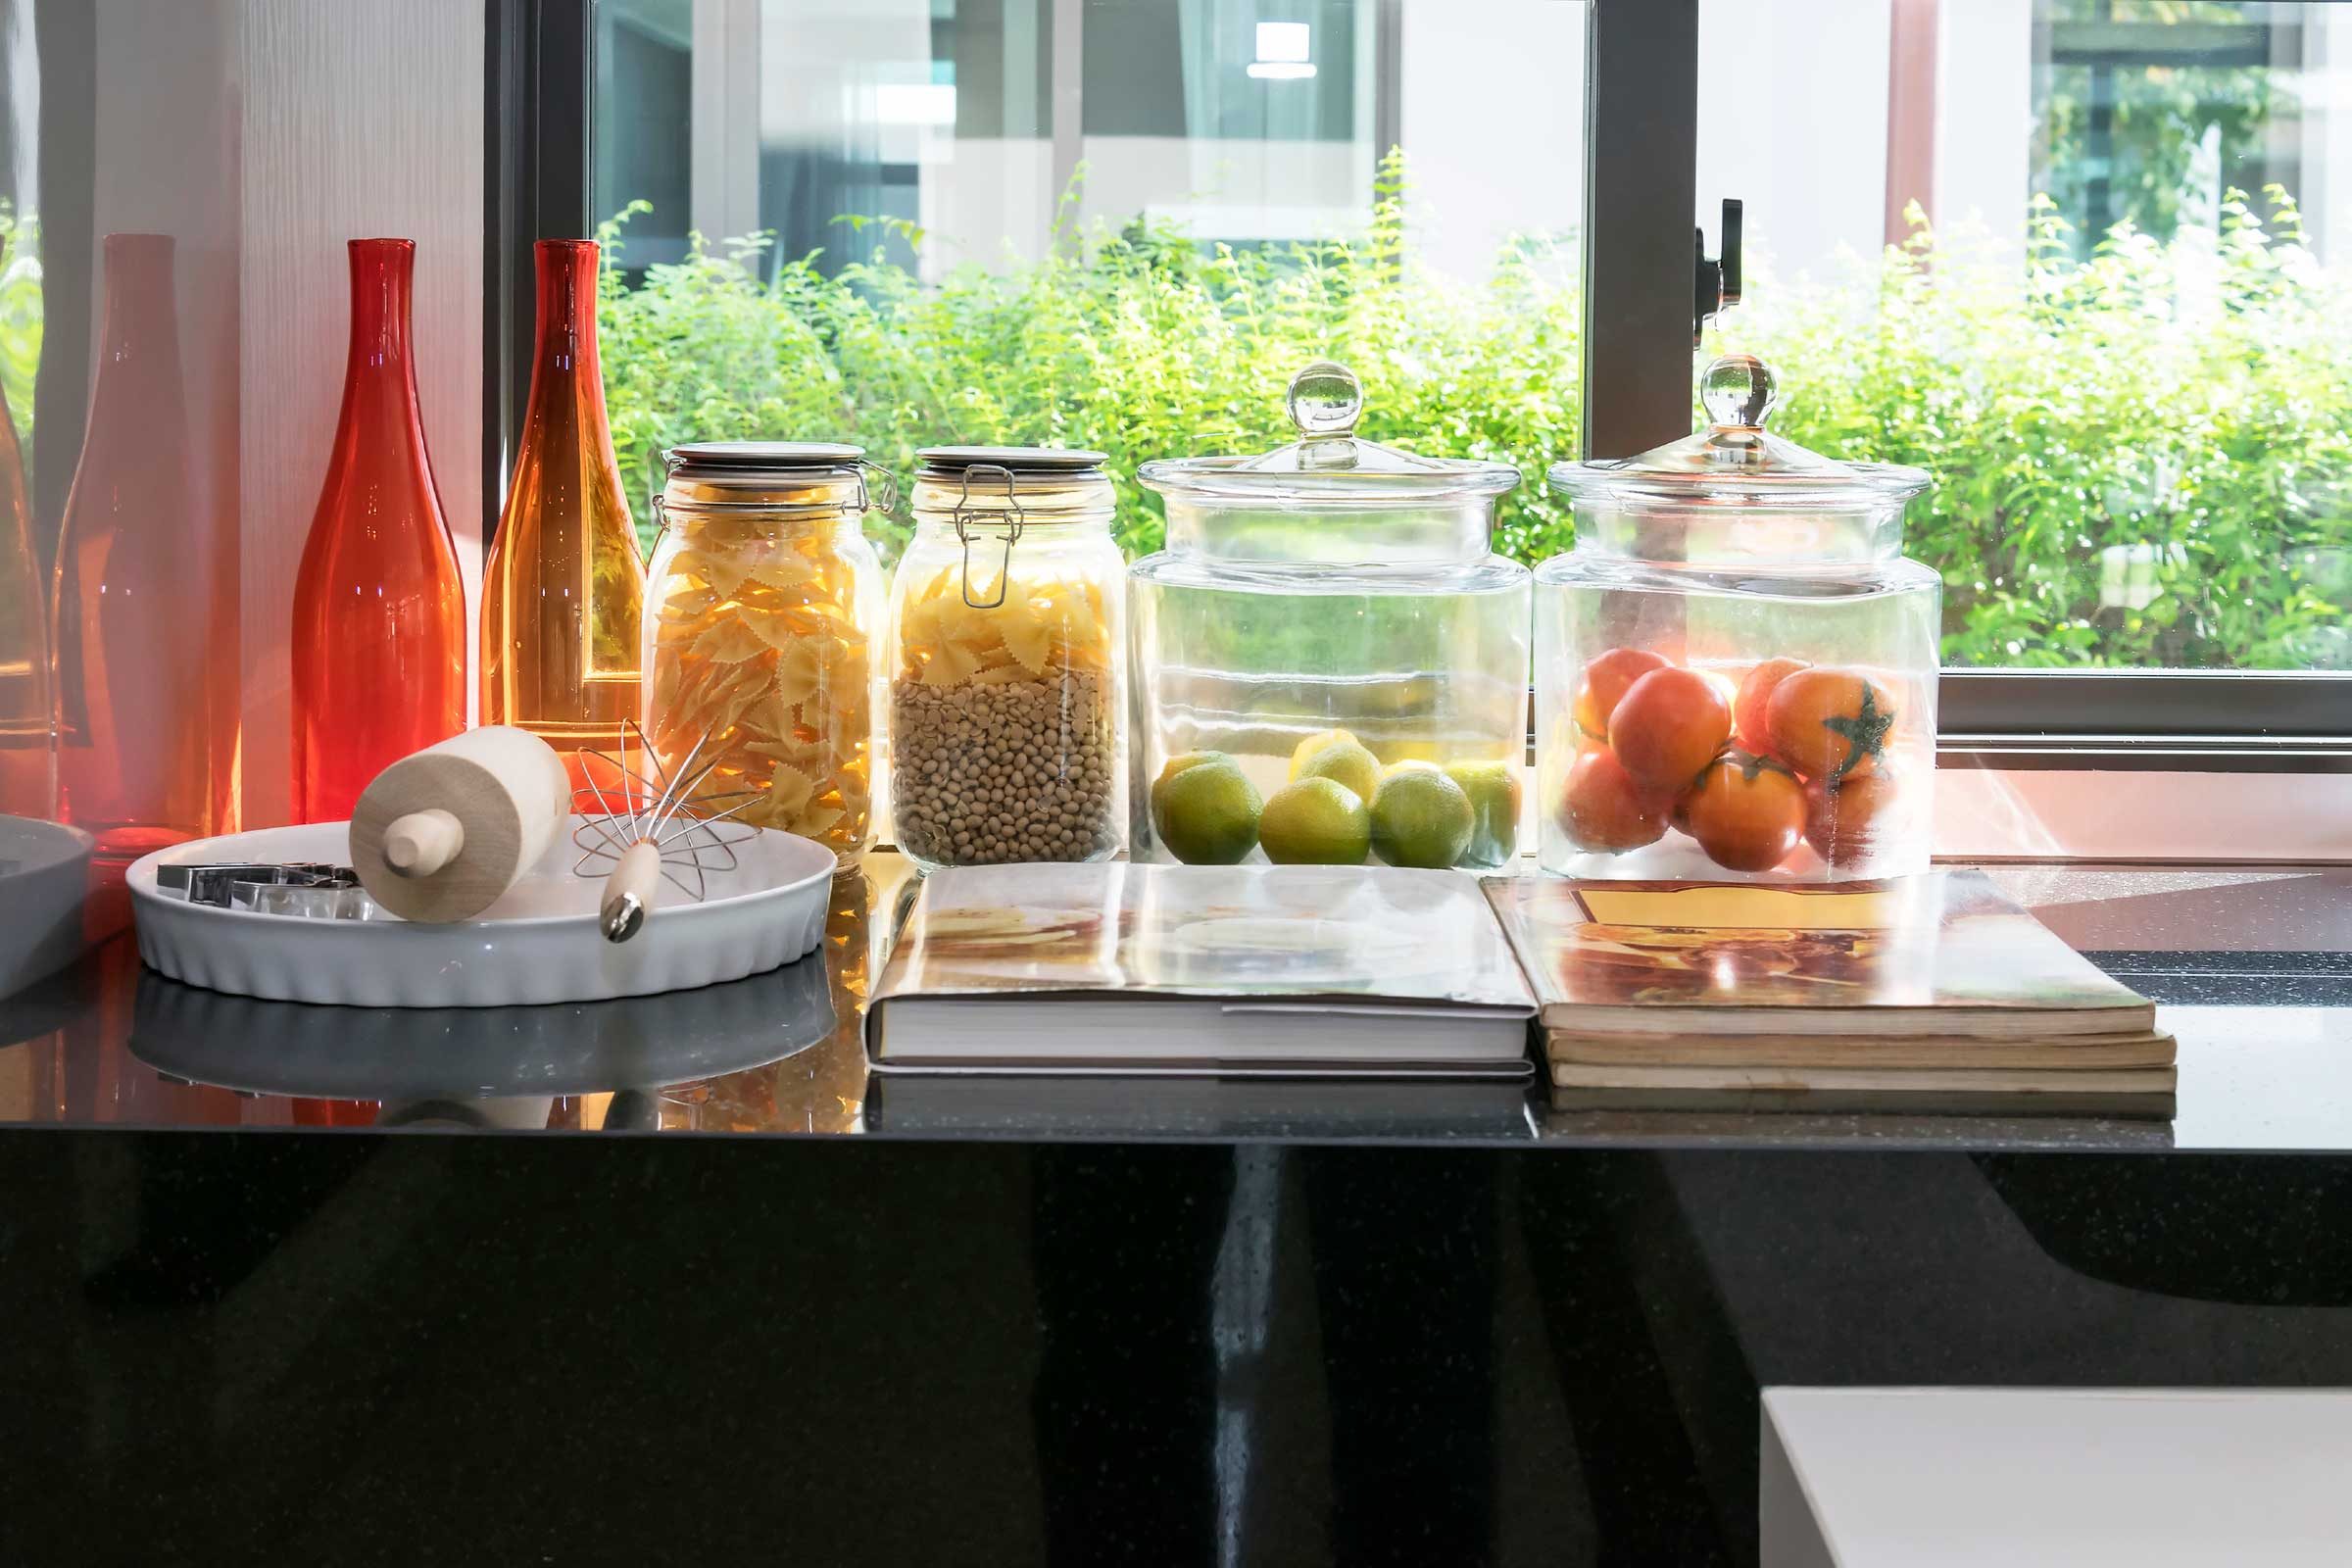 9 Ways Your Kitchen Setup Can Help You Lose Weight (No Dieting Required)